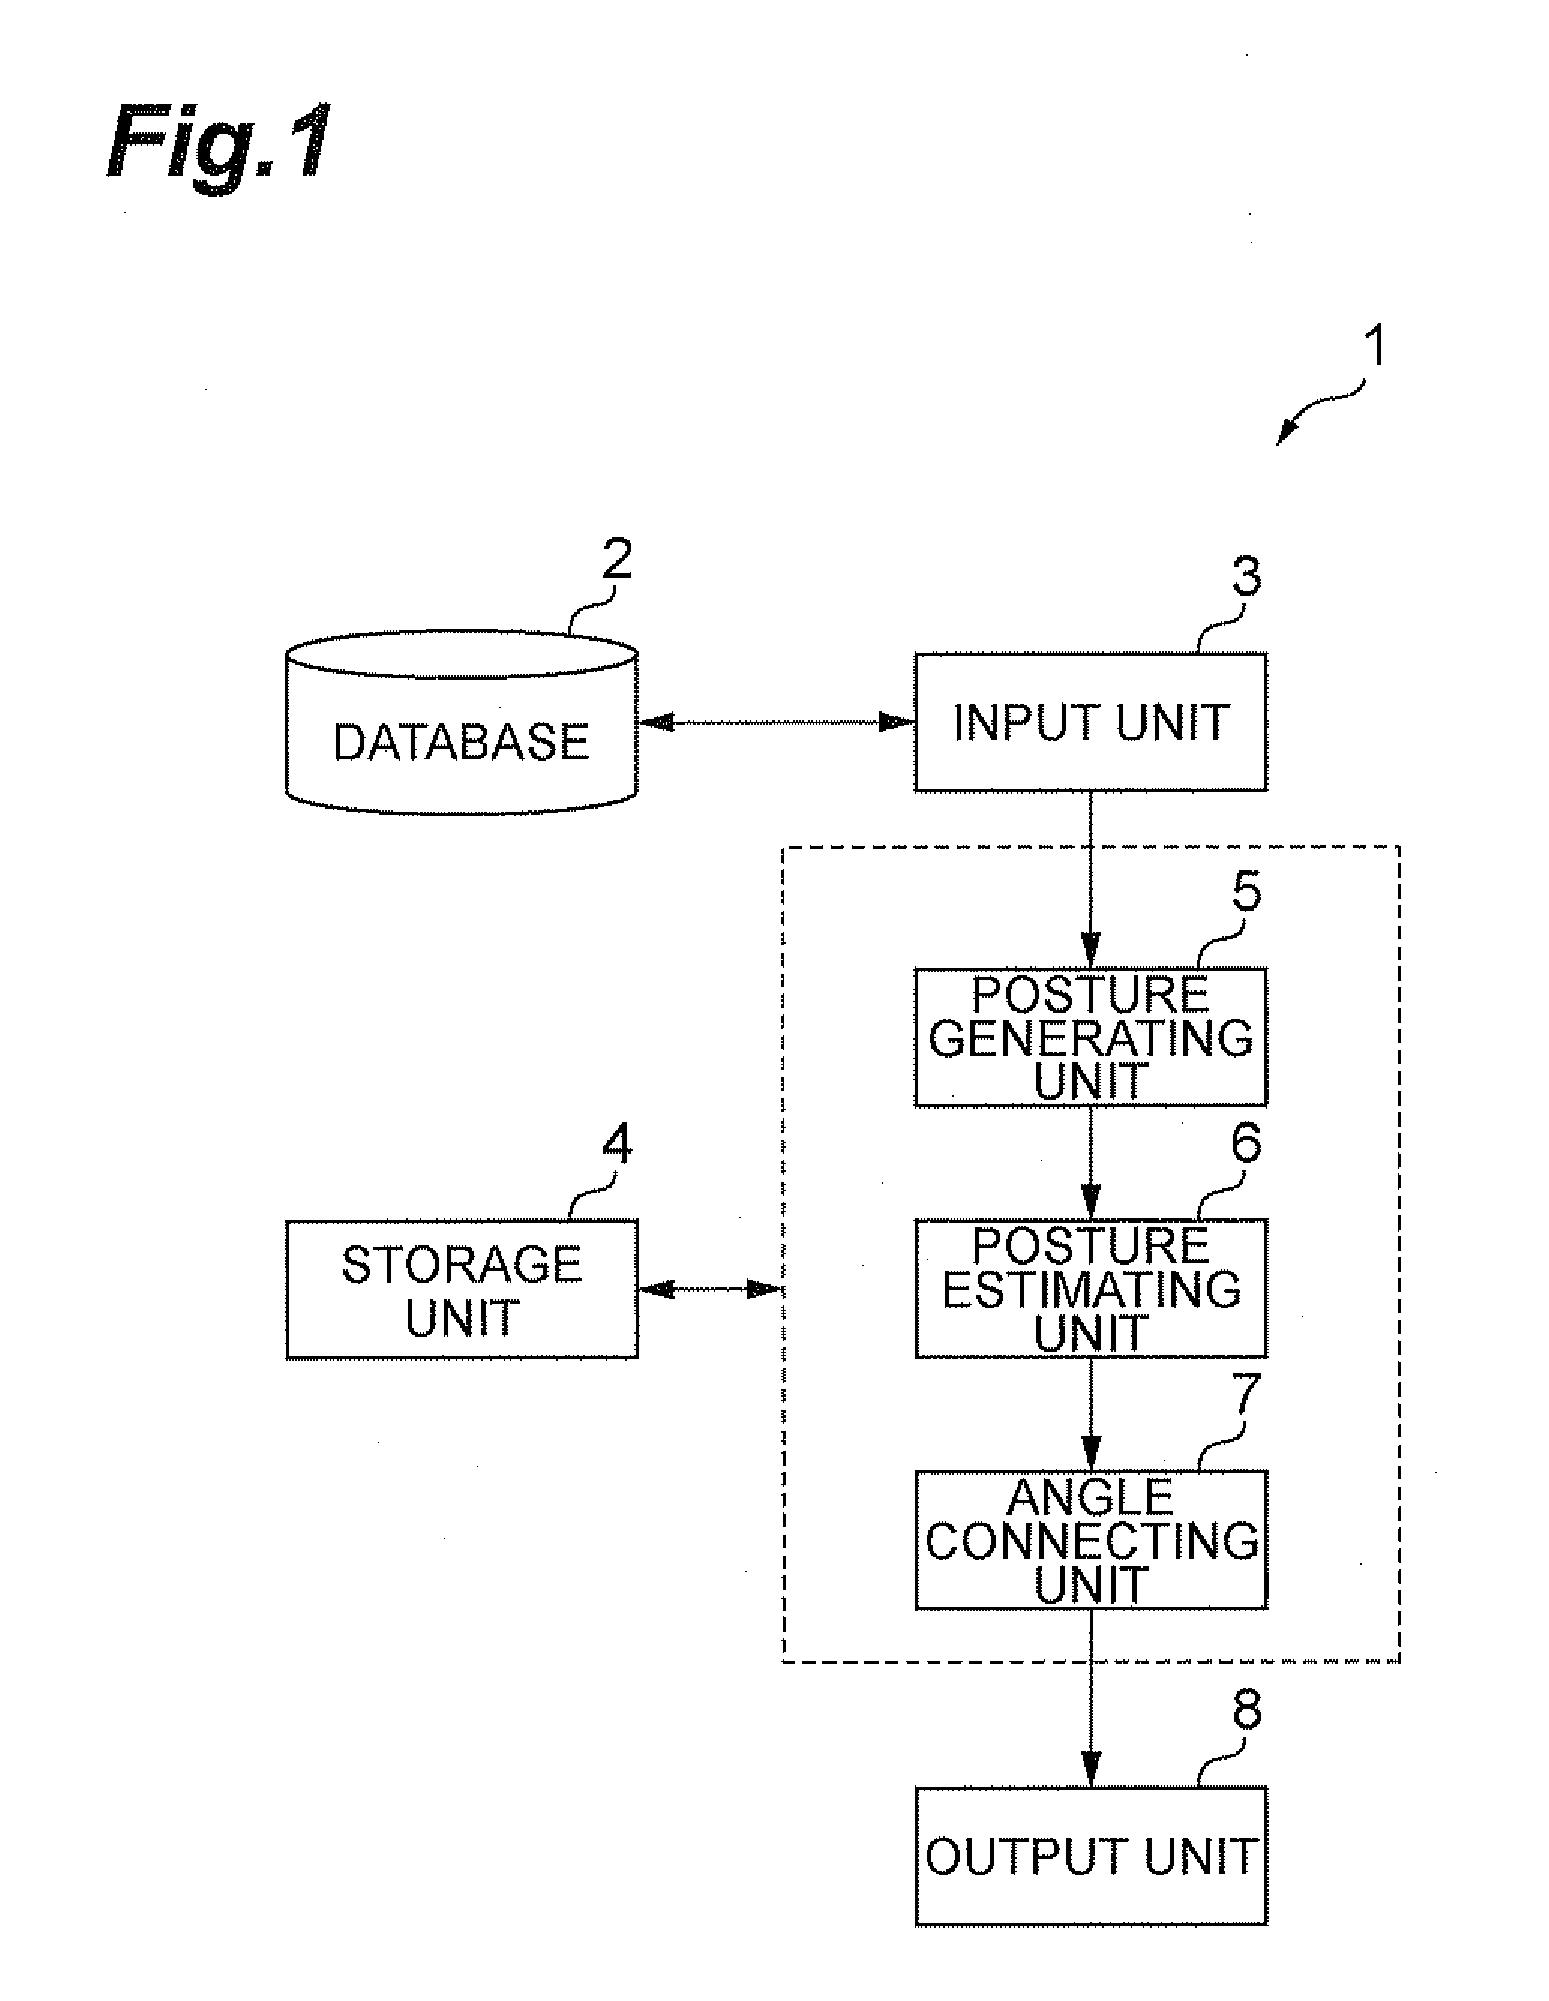 Movement path generation device for robot